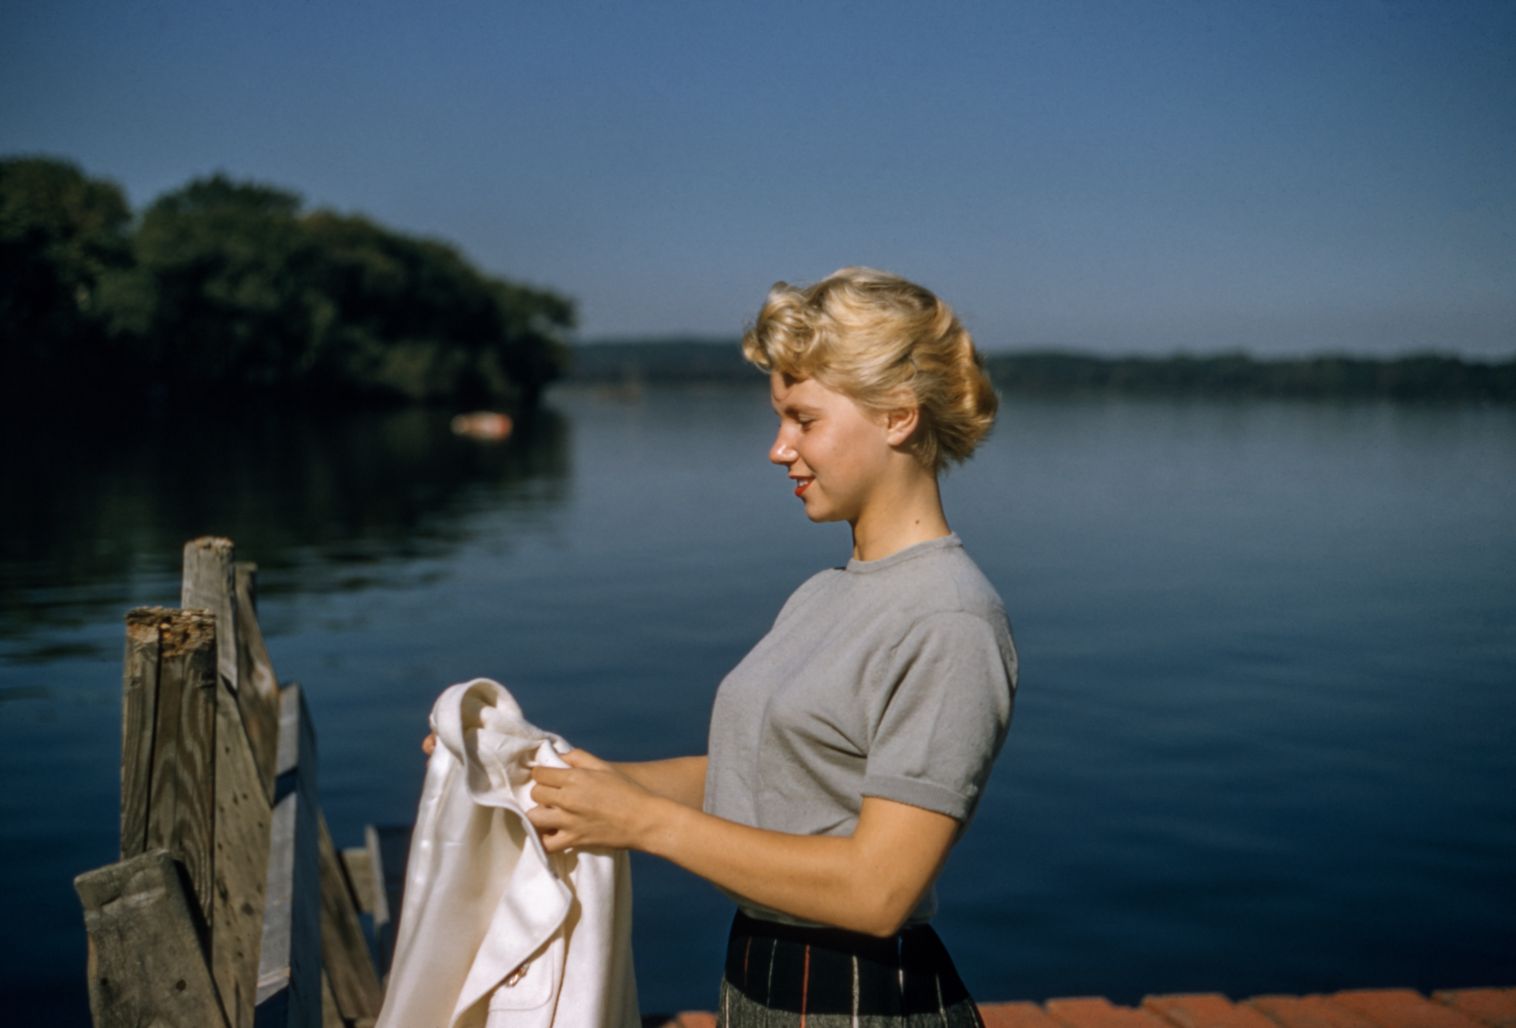 vintage portrait of blonde woman on a dock by the lake